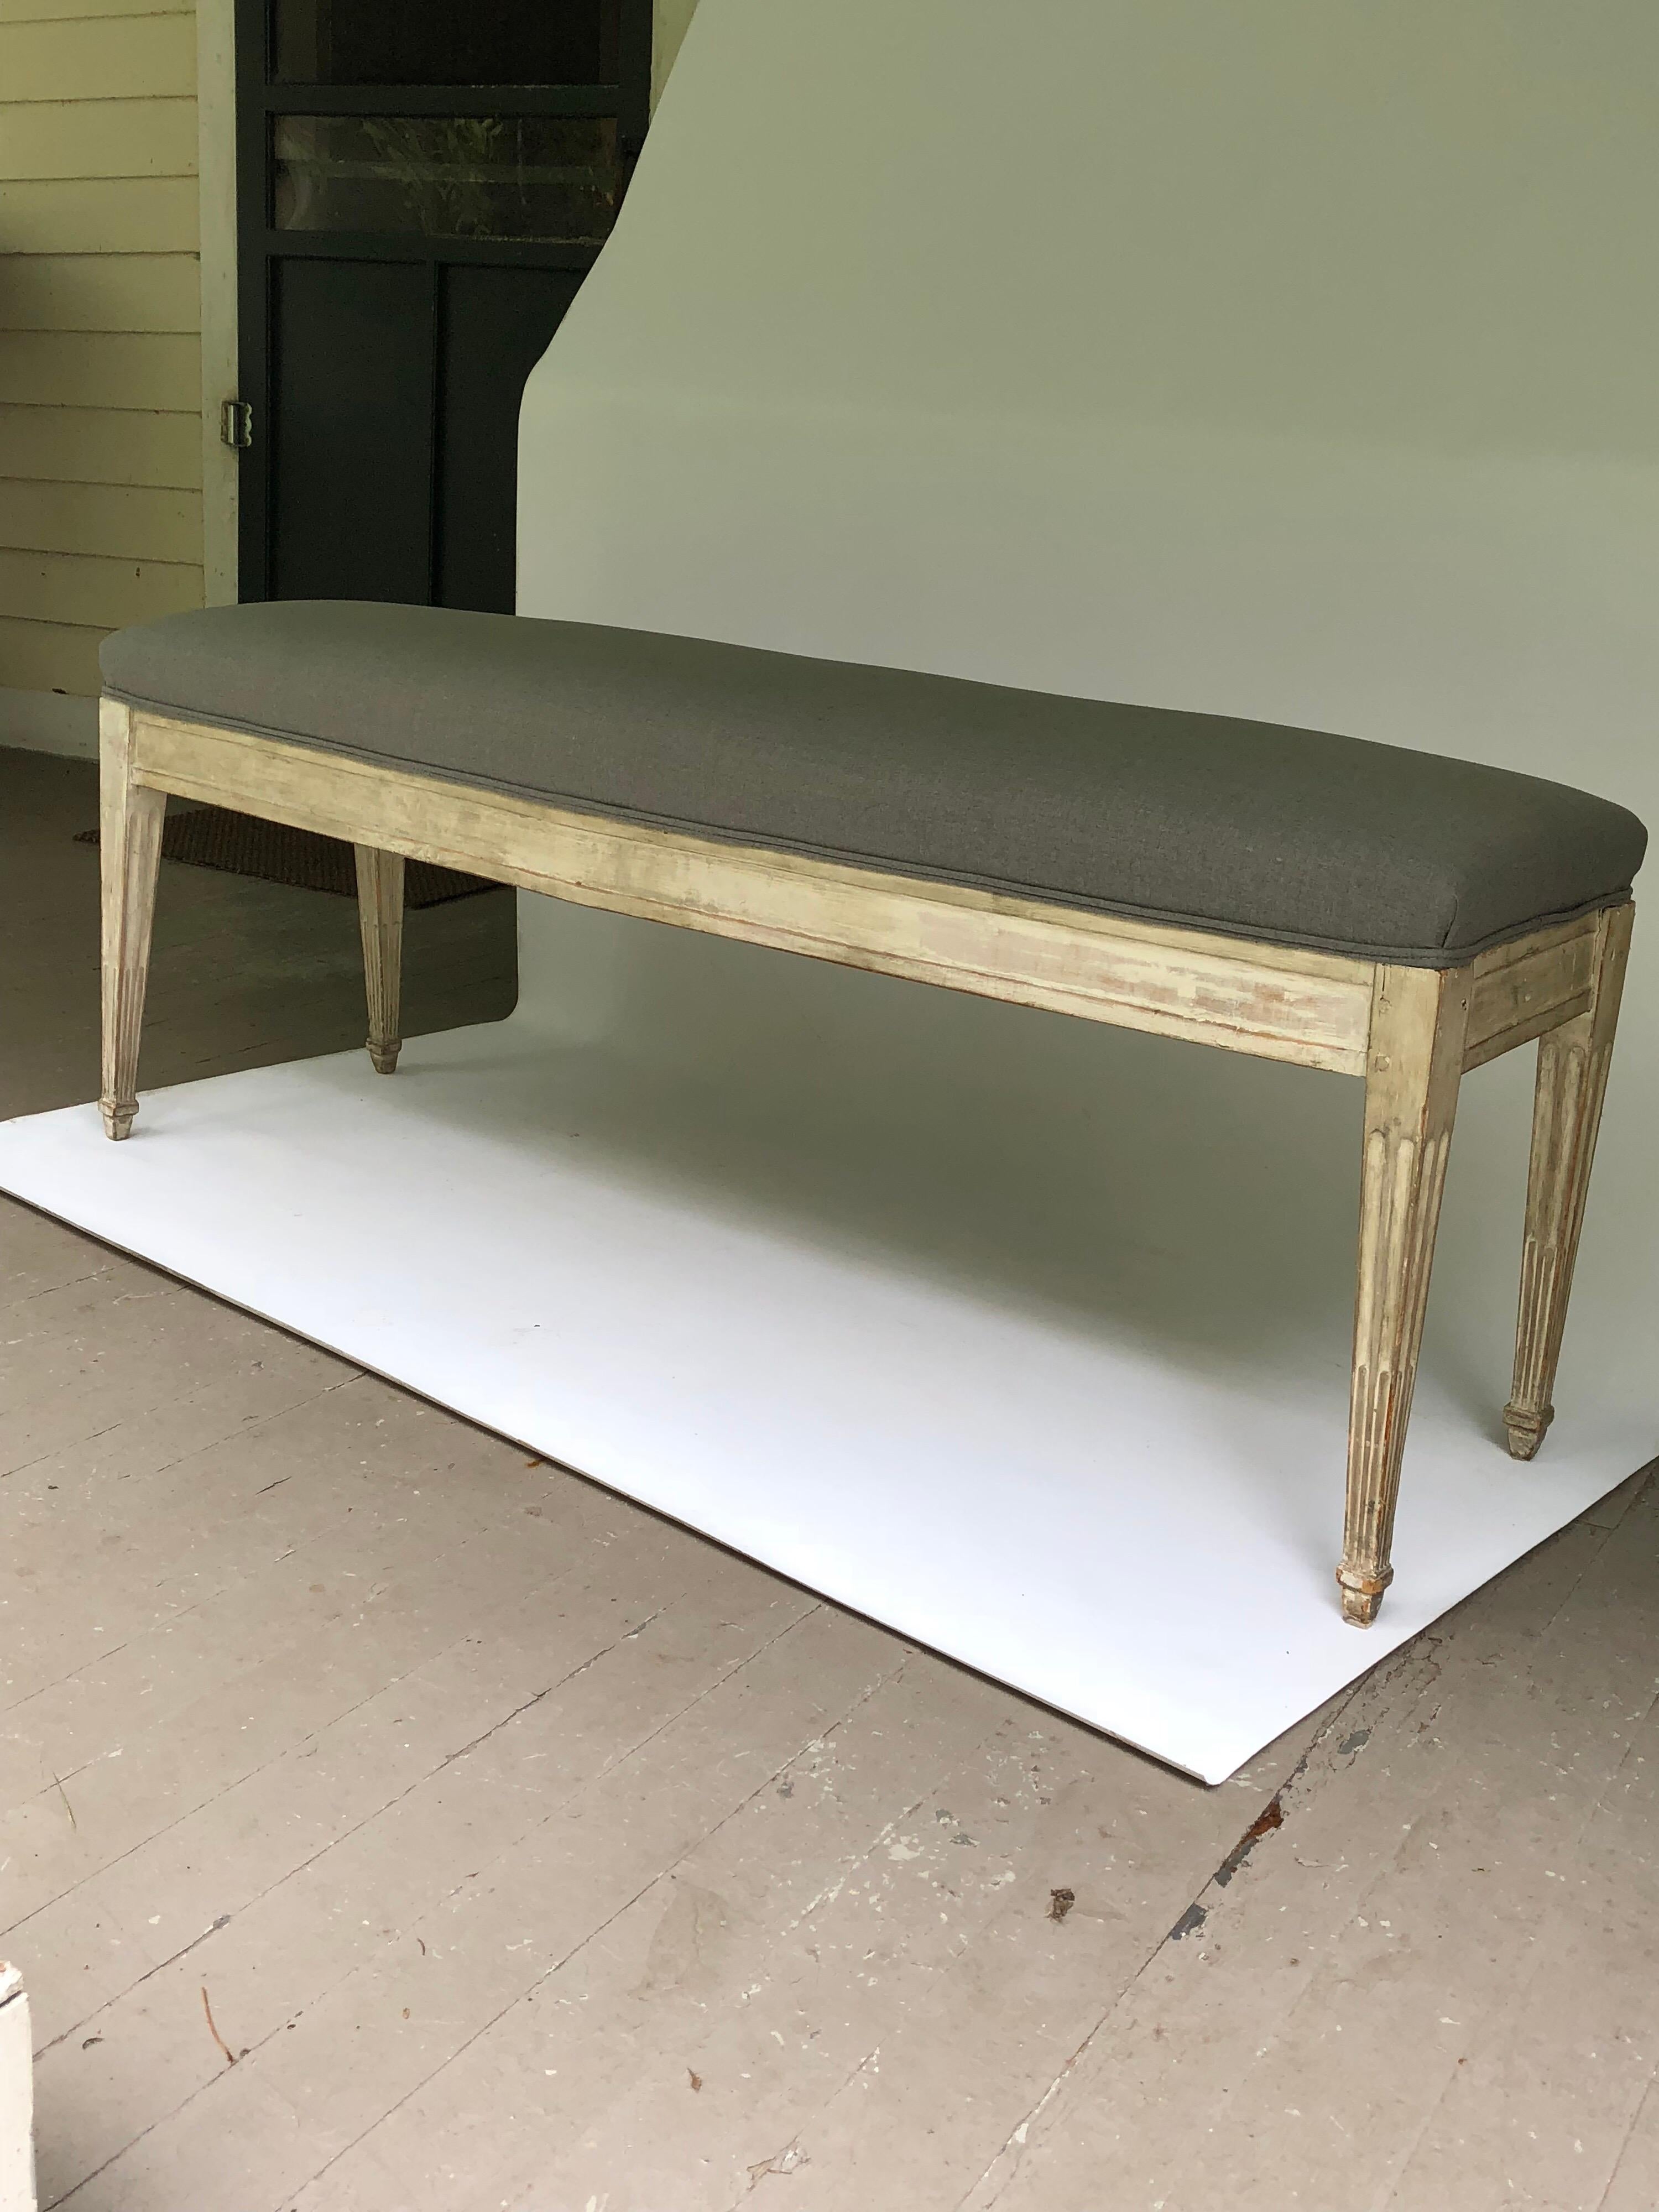 Louis XVI-style white painted bench upholstered in grey cotton fabric. Probably Scandinavian.
Few stains on the upholstery, but still serviceable.